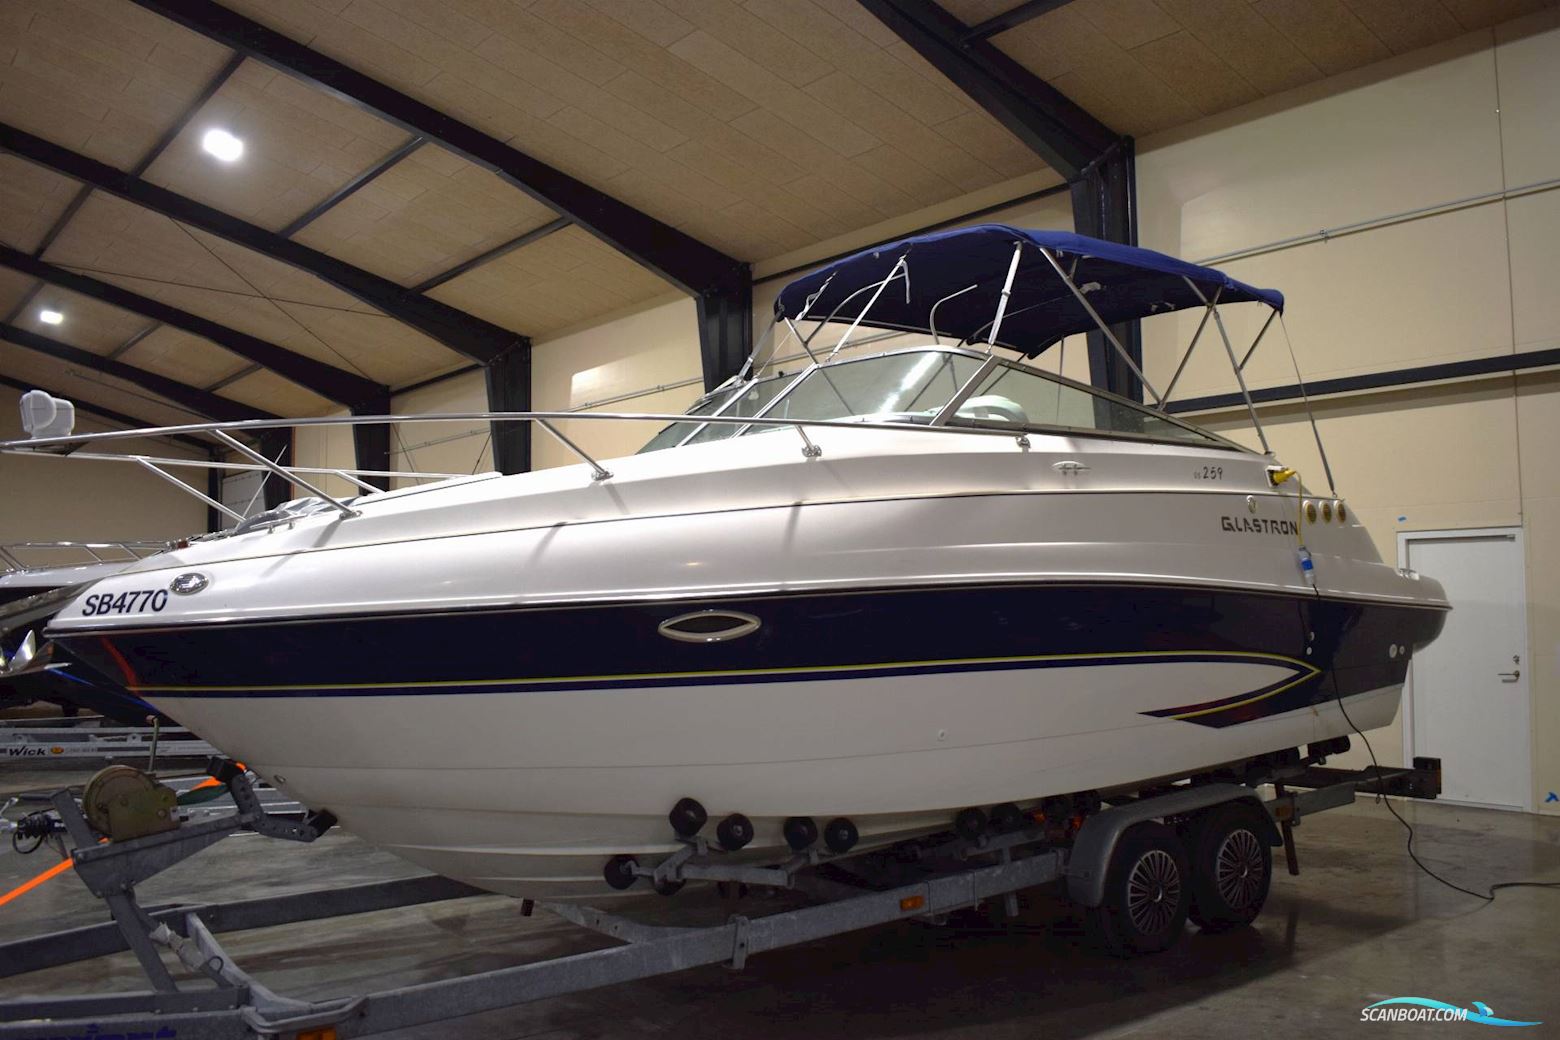 Glastron 259 GS Motor boat 2006, with Volvo Penta 5.0 Gxi DP engine, Denmark